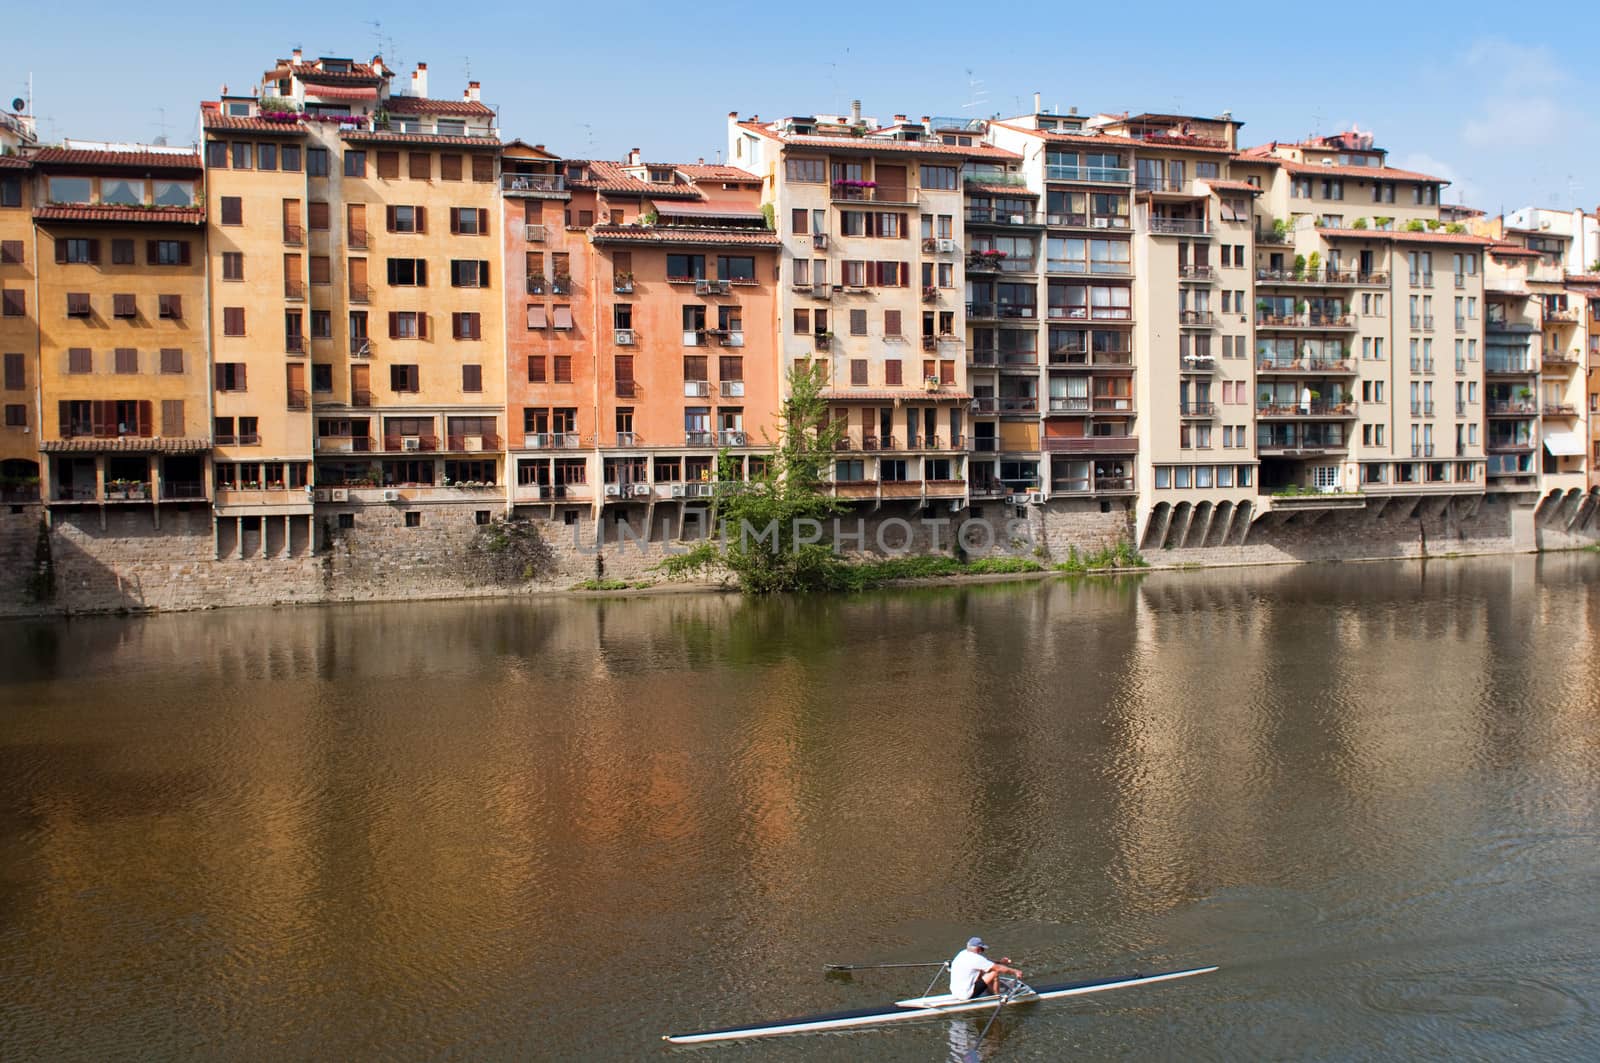 Bank of river Arno in Florence, Tuscany, Italy. by lexan